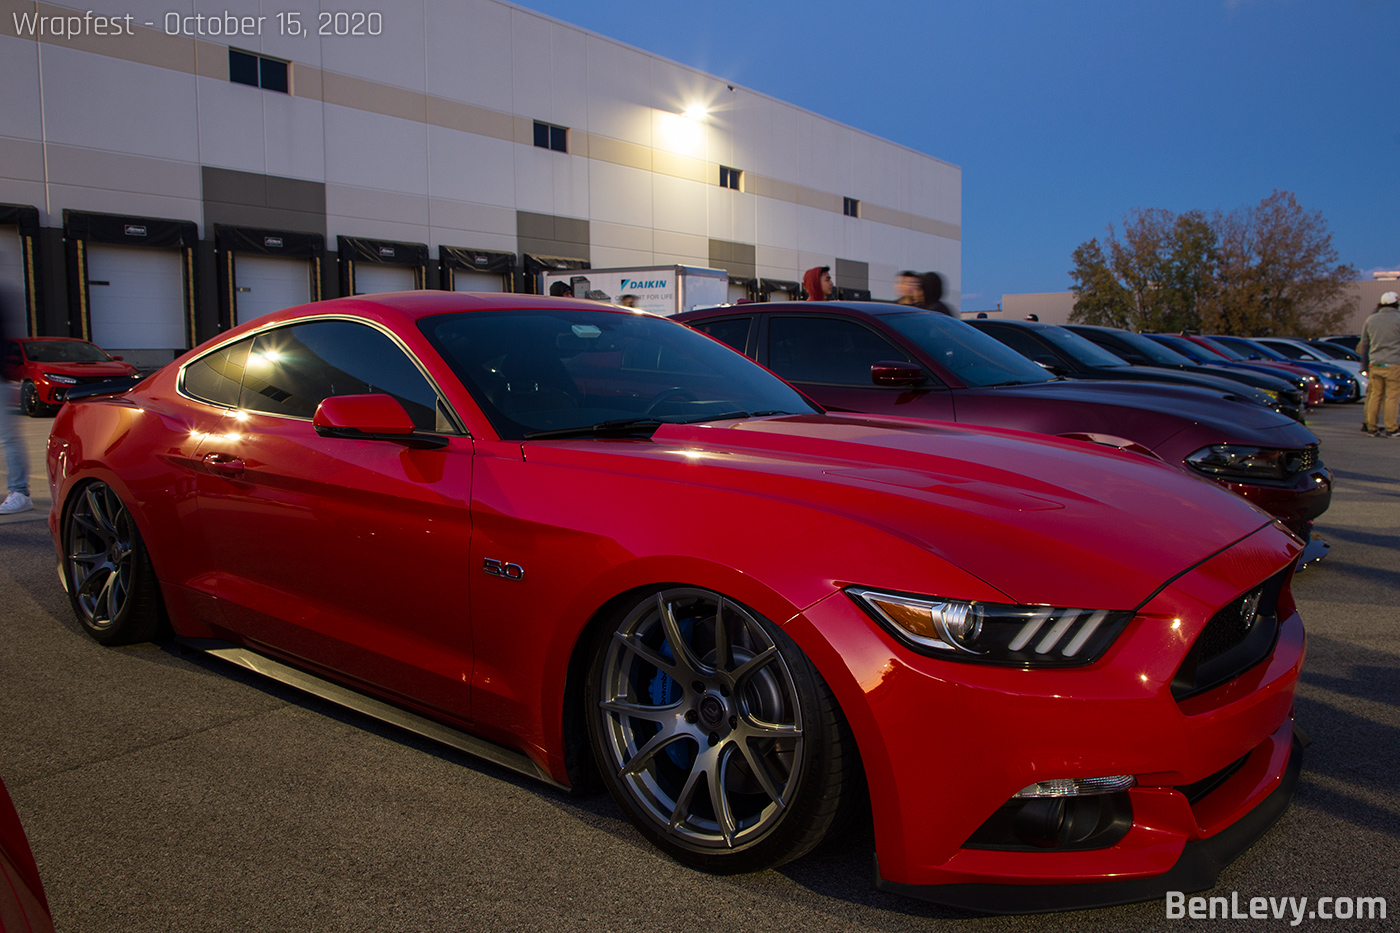 Lowered Red S550 Mustang 5.0